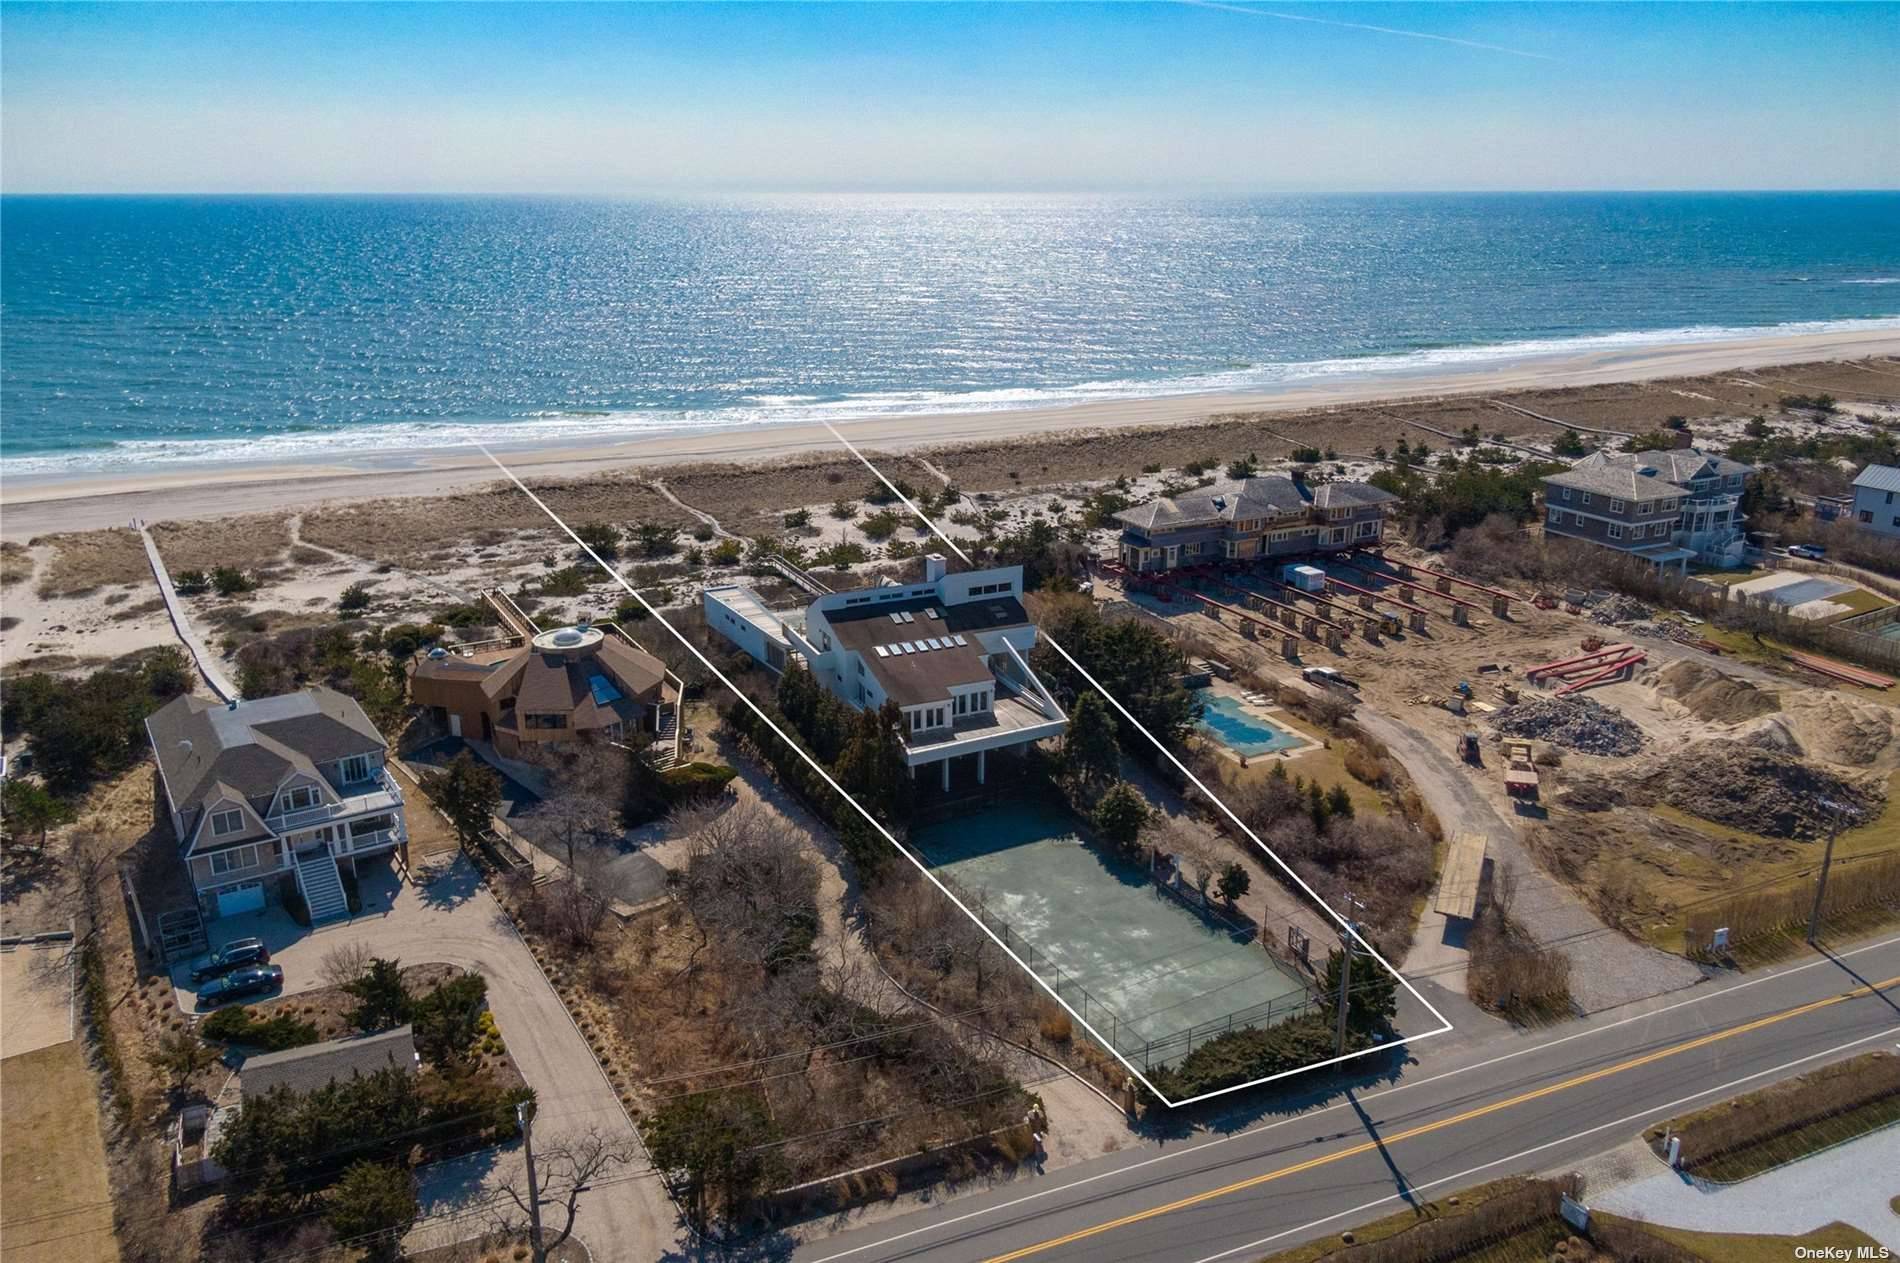 Perfectly situated between the bridges on over an acre with 112 feet of oceanfront.